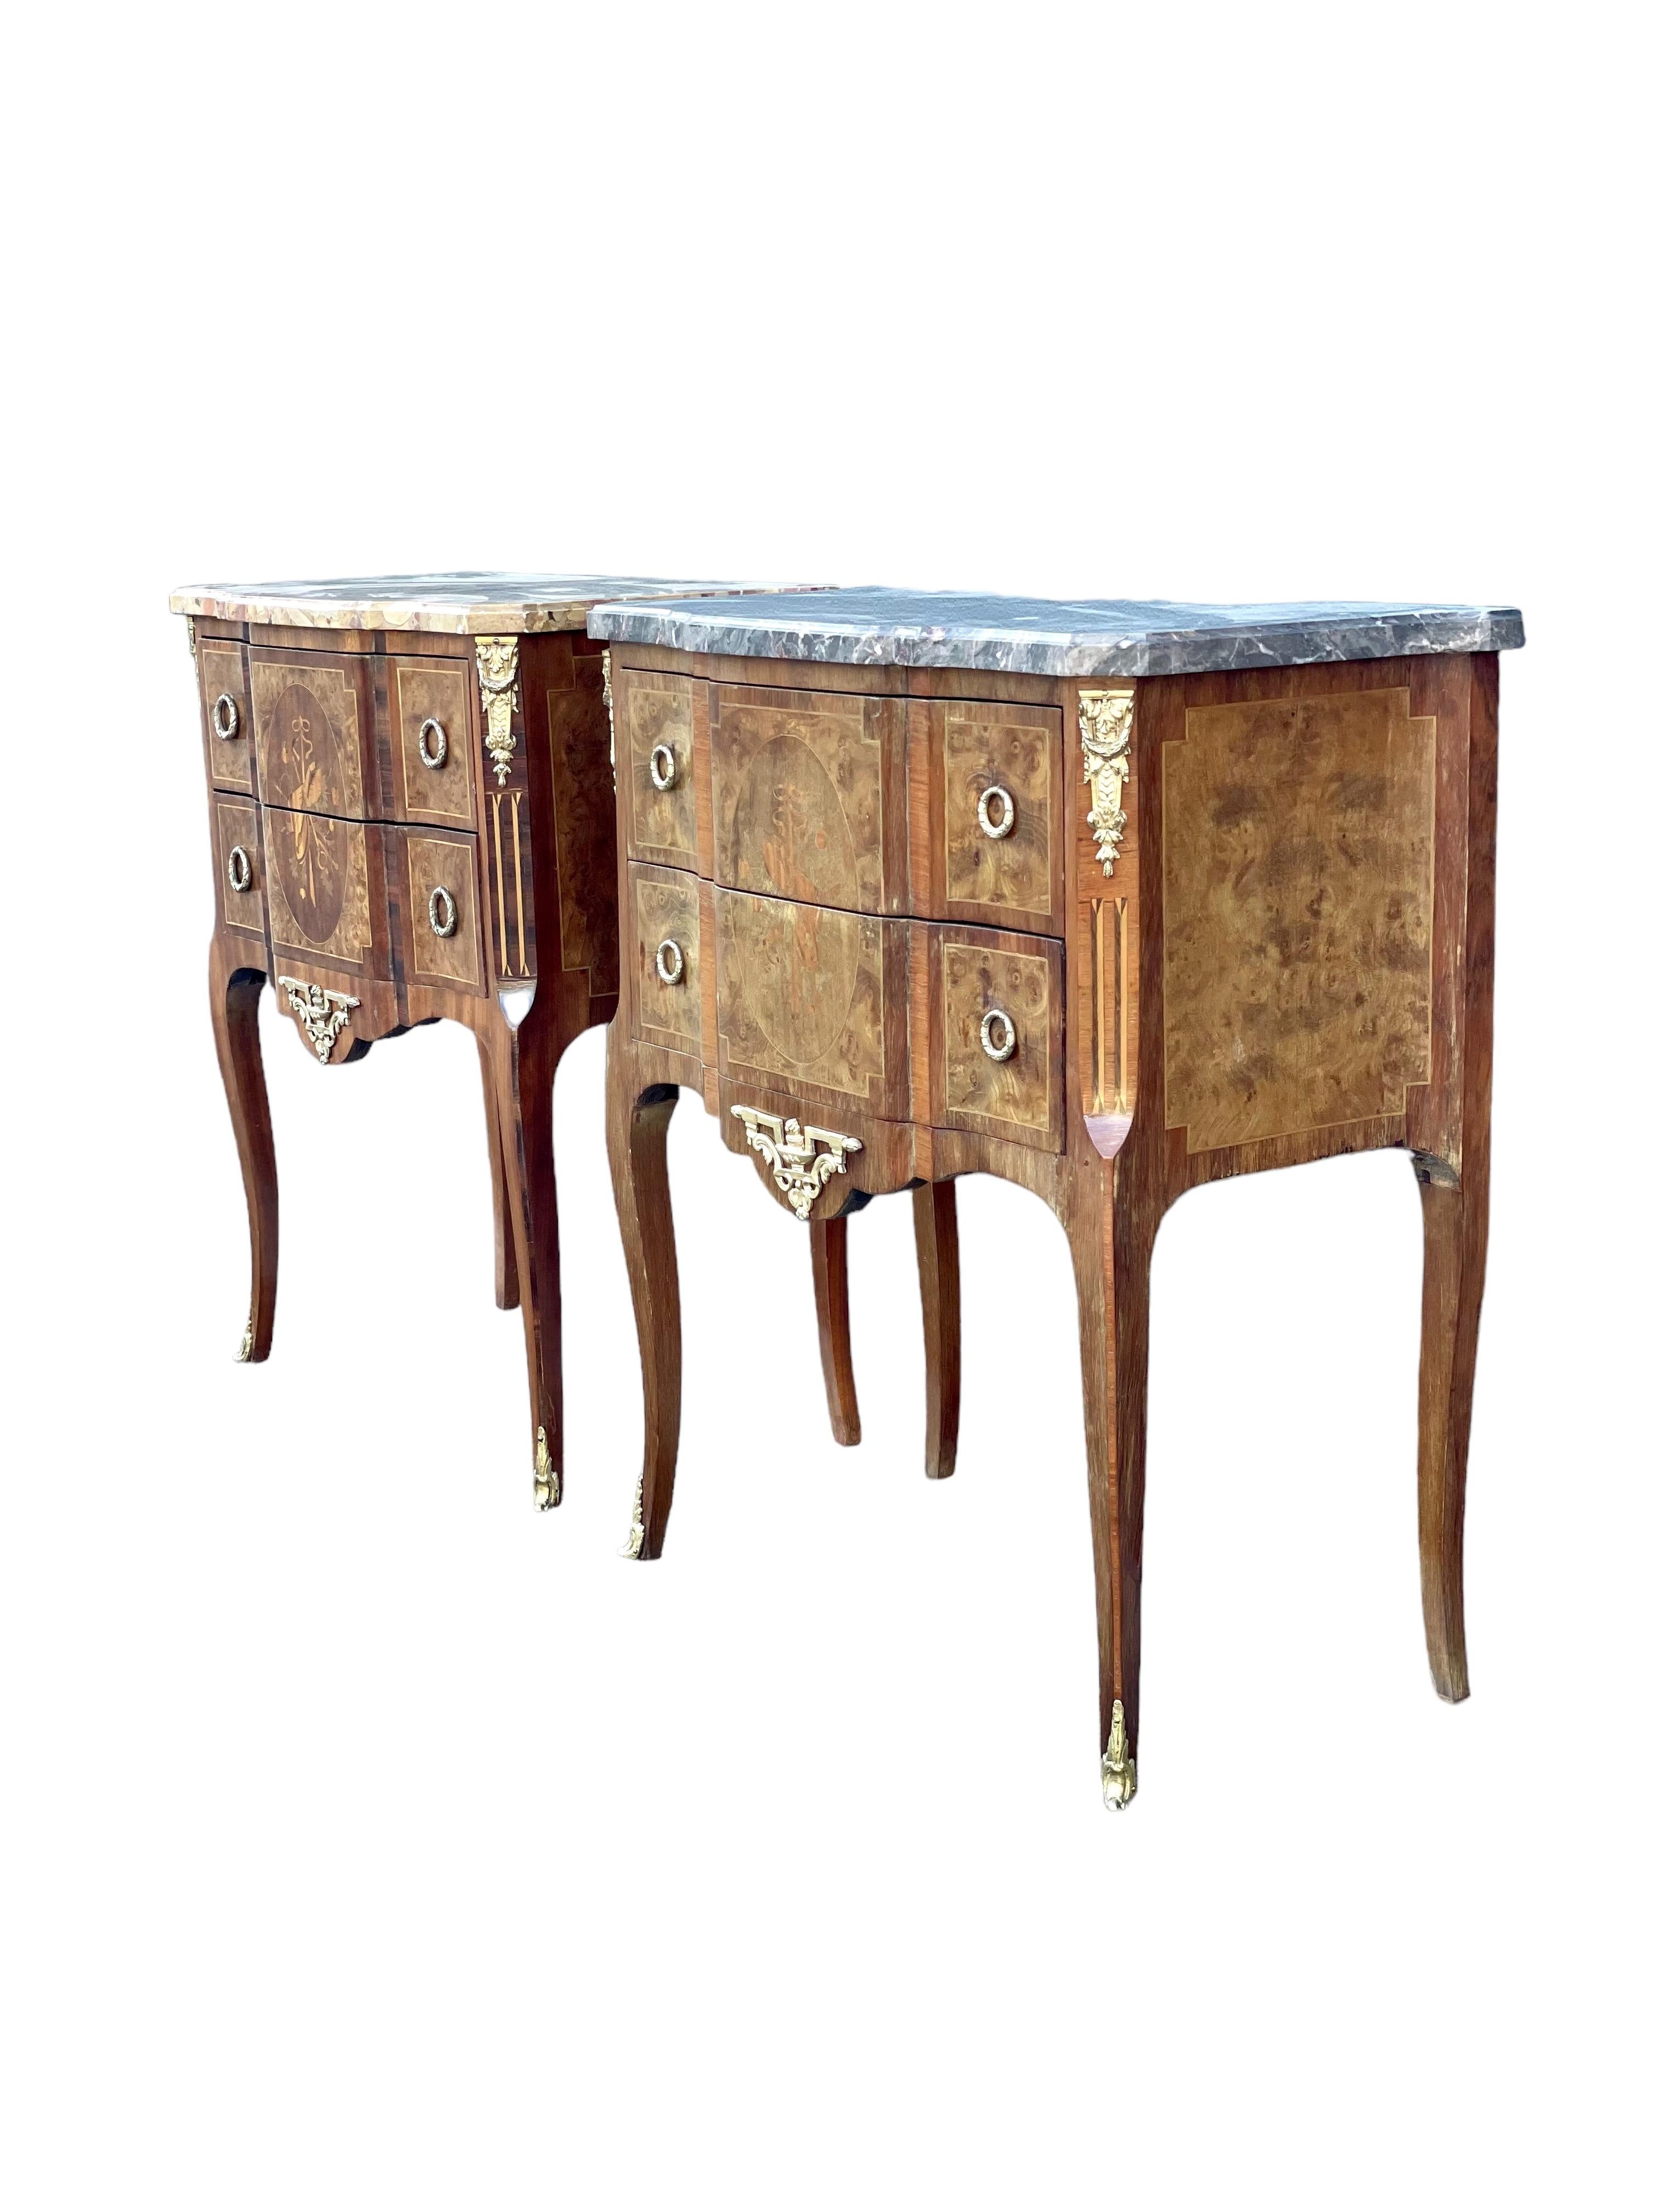 A very stylish and complementary pair of Louis XV/XVI transitional period commodes, each beautifully decorated in veneered wood with inlaid marquetry, and each topped with a contrasting coloured marble top – one grey, and one with yellow-tinted